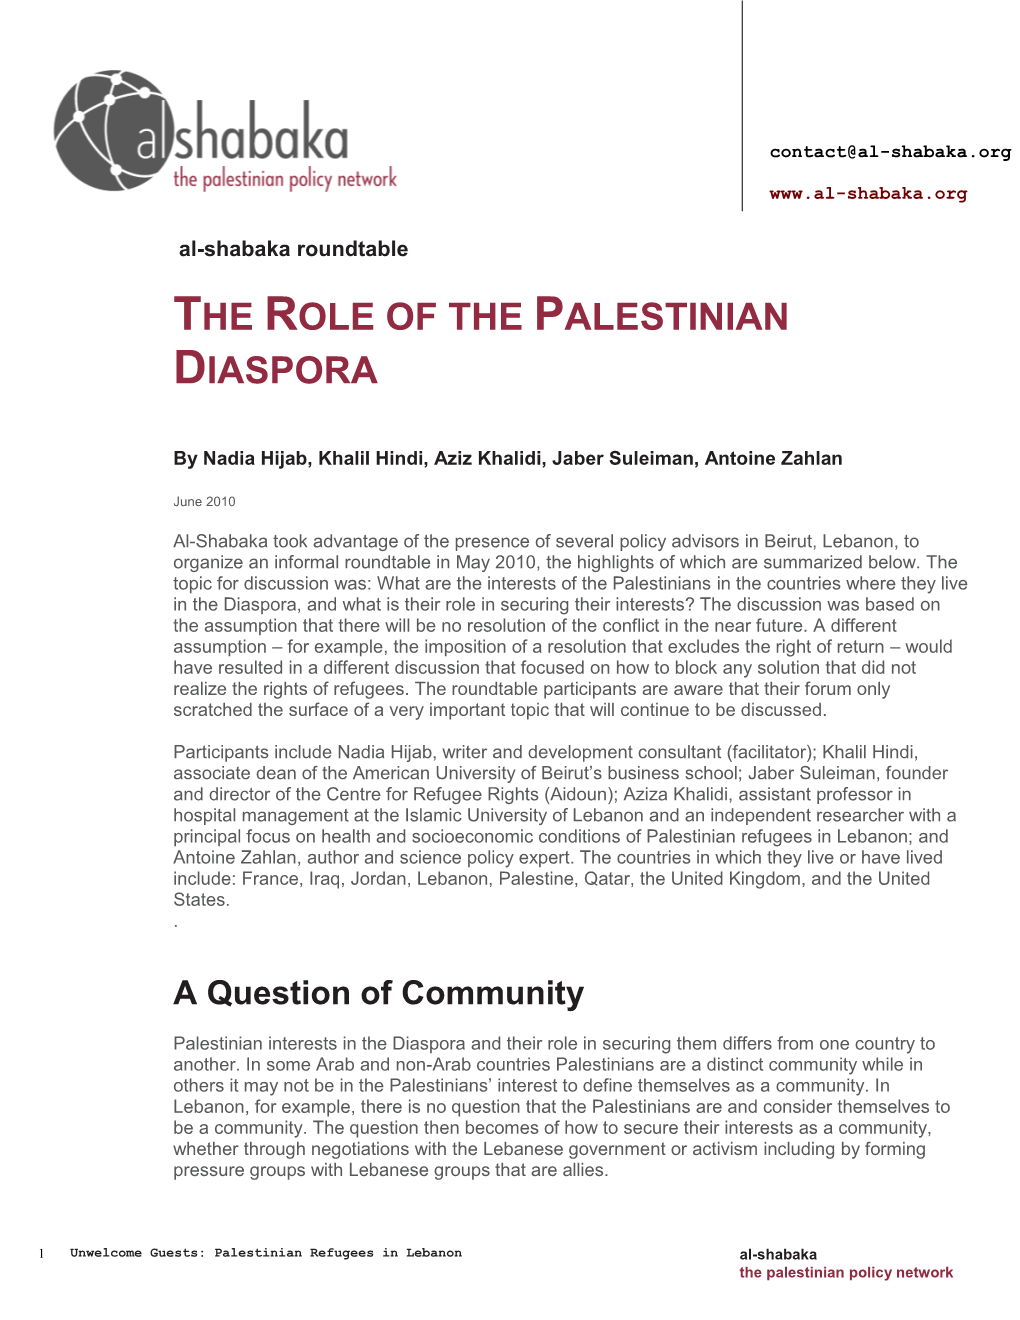 Al-Shabaka Policy Briefs May Be Reproduced with Due Attribution to Al-Shabaka, the Palestinian Policy Network